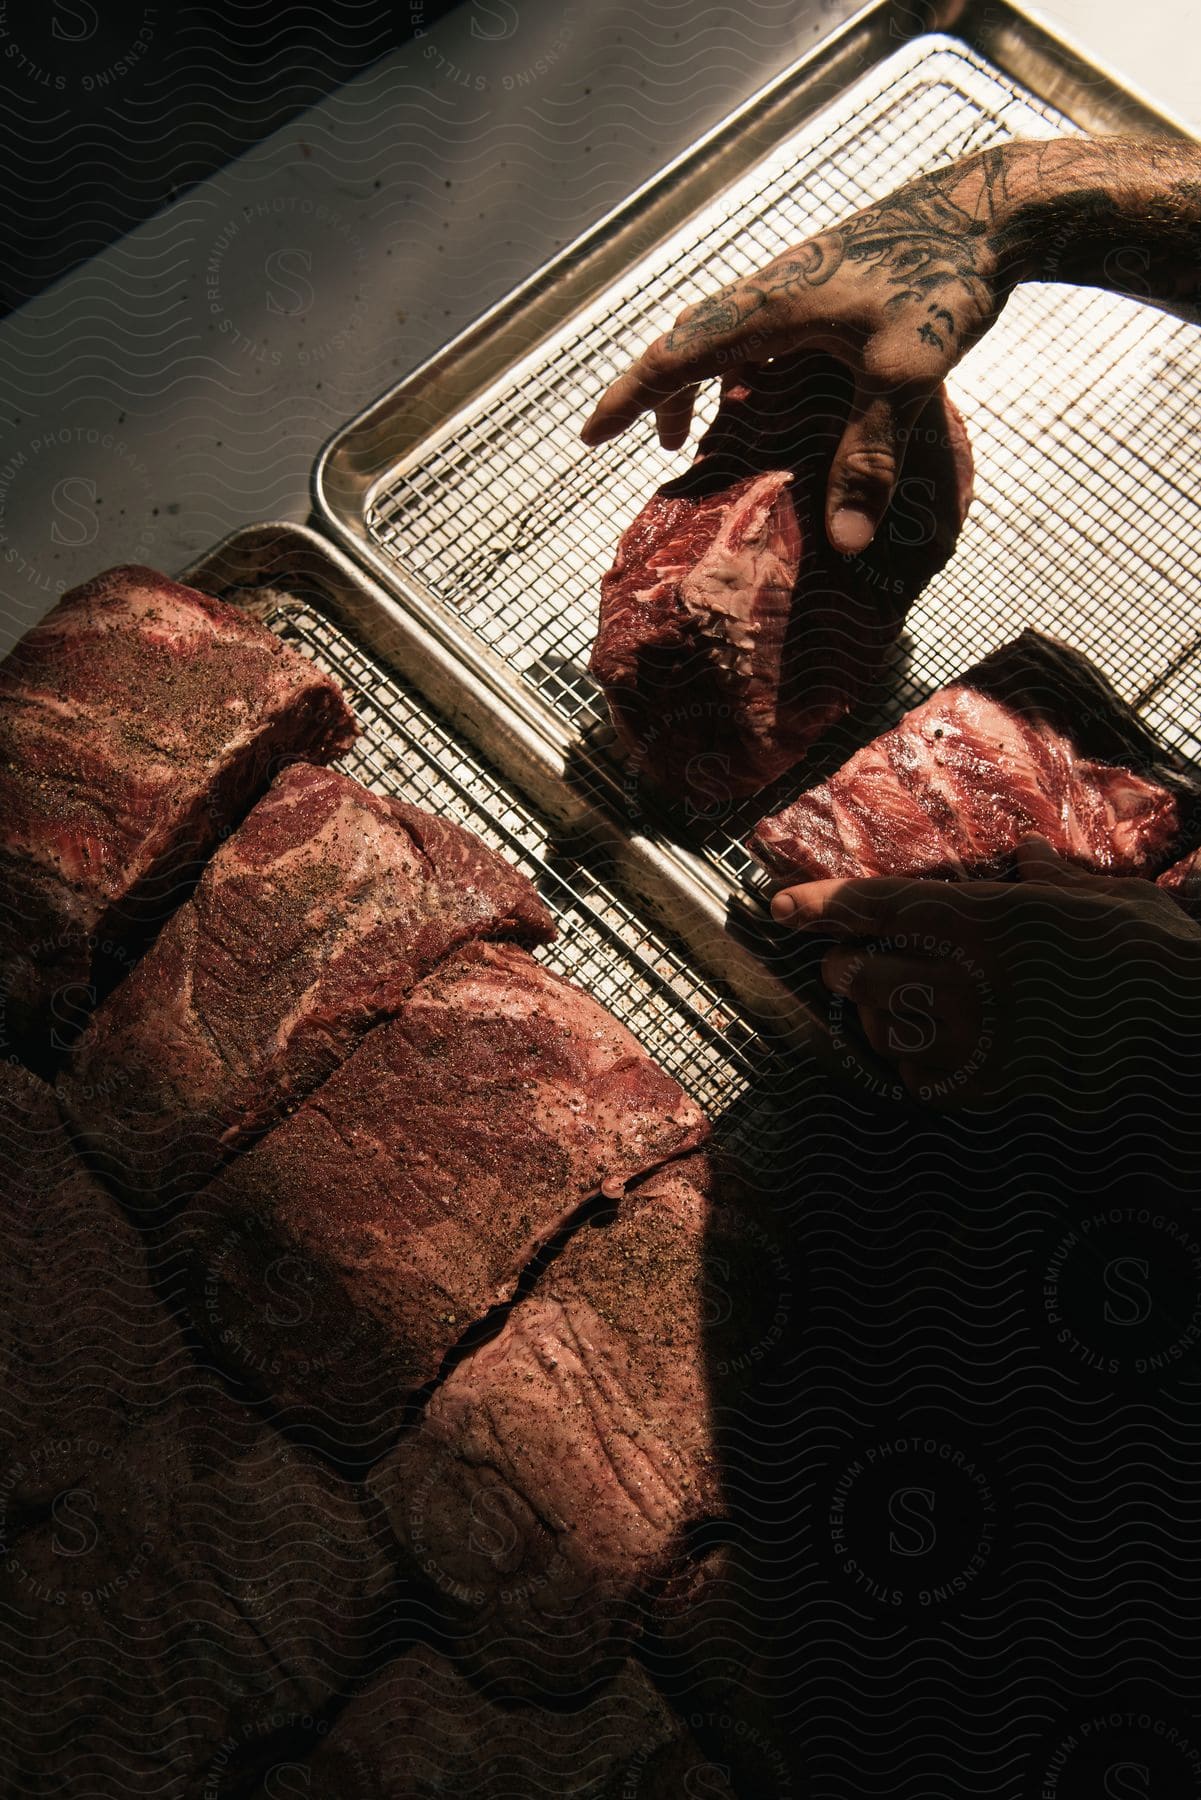 A person is seasoning pieces of meat before cooking them in the oven